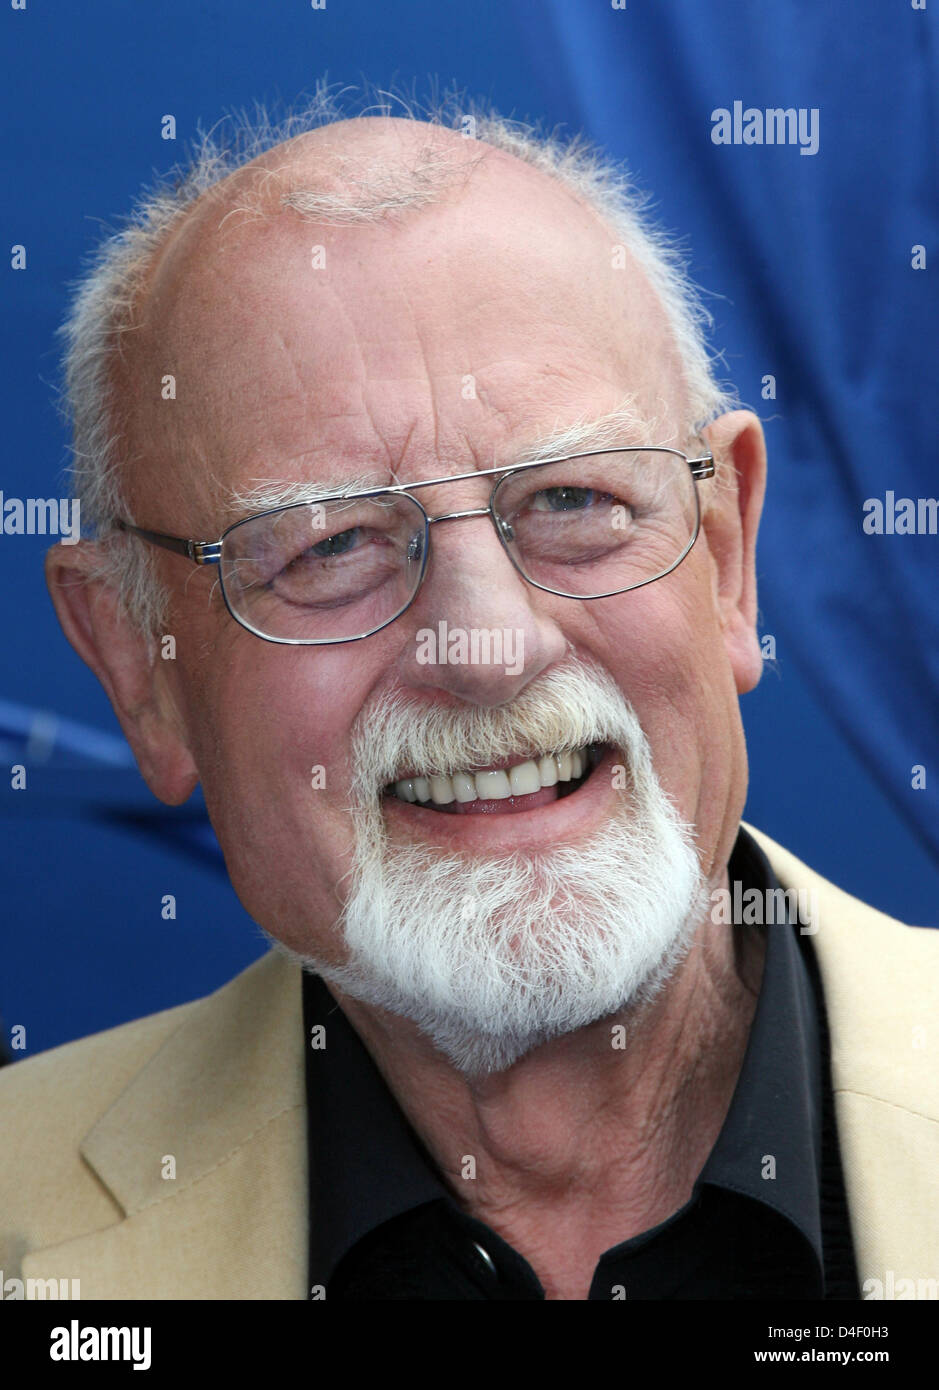 Singer Roger Whittaker pictured at the TV music show 'Immer wieder Sonntags' ('Sunday again and again') at Europapark in Rust, Germany, 01 June 2008. German public broadcaster ARD produces twelve episodes of the show. Photo: Patrick Seeger Stock Photo